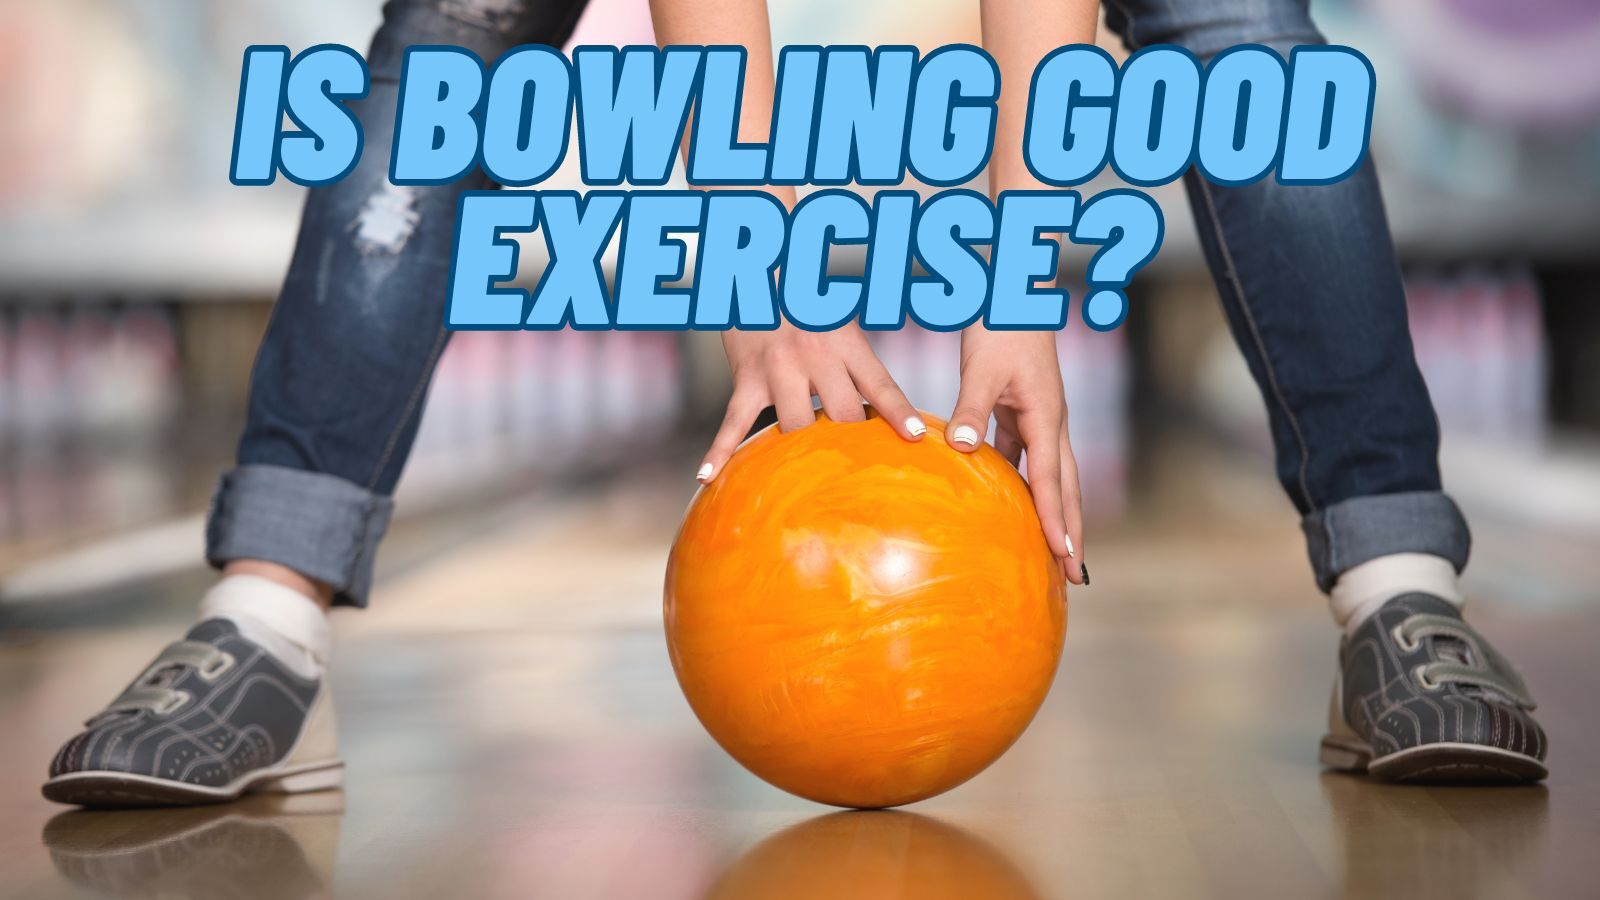 Is Bowling Good Exercise: Keep You Stay Healthy